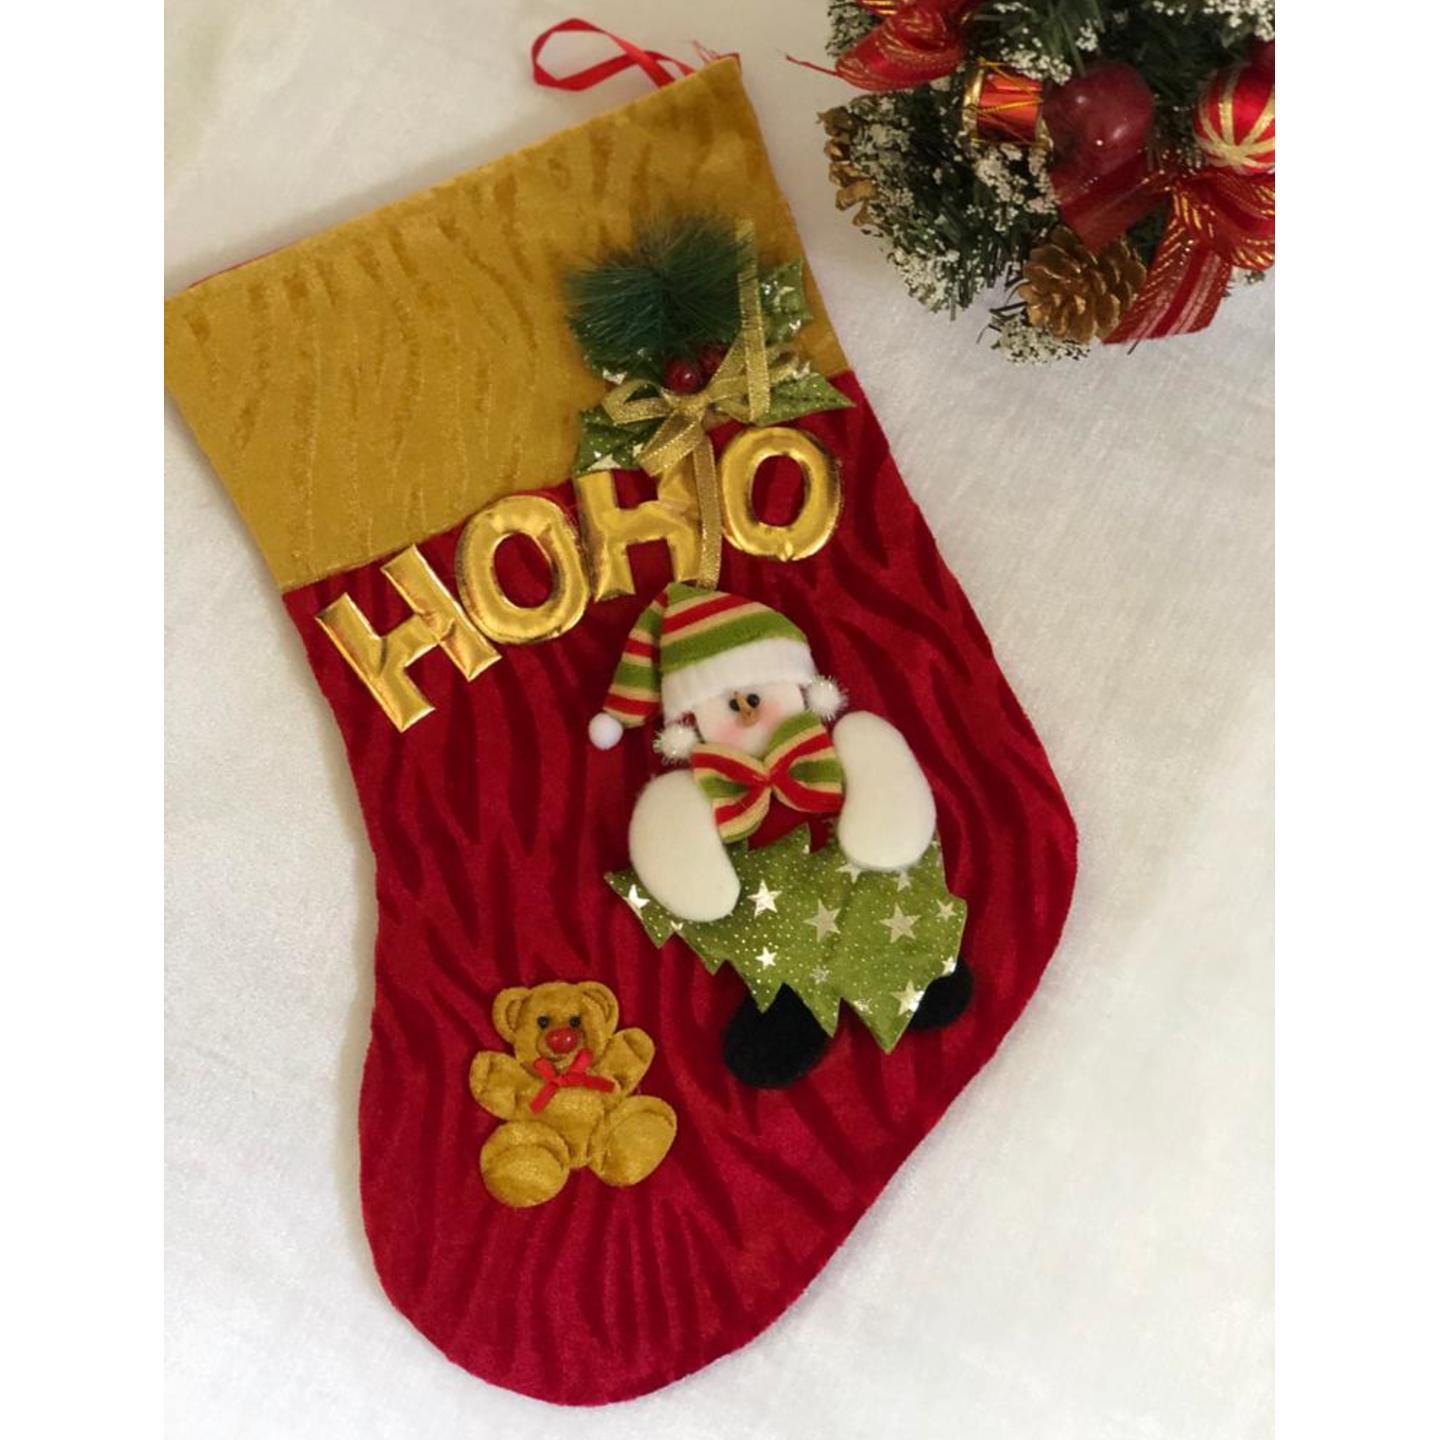 Personalised Stockings - Snowman with a Cap